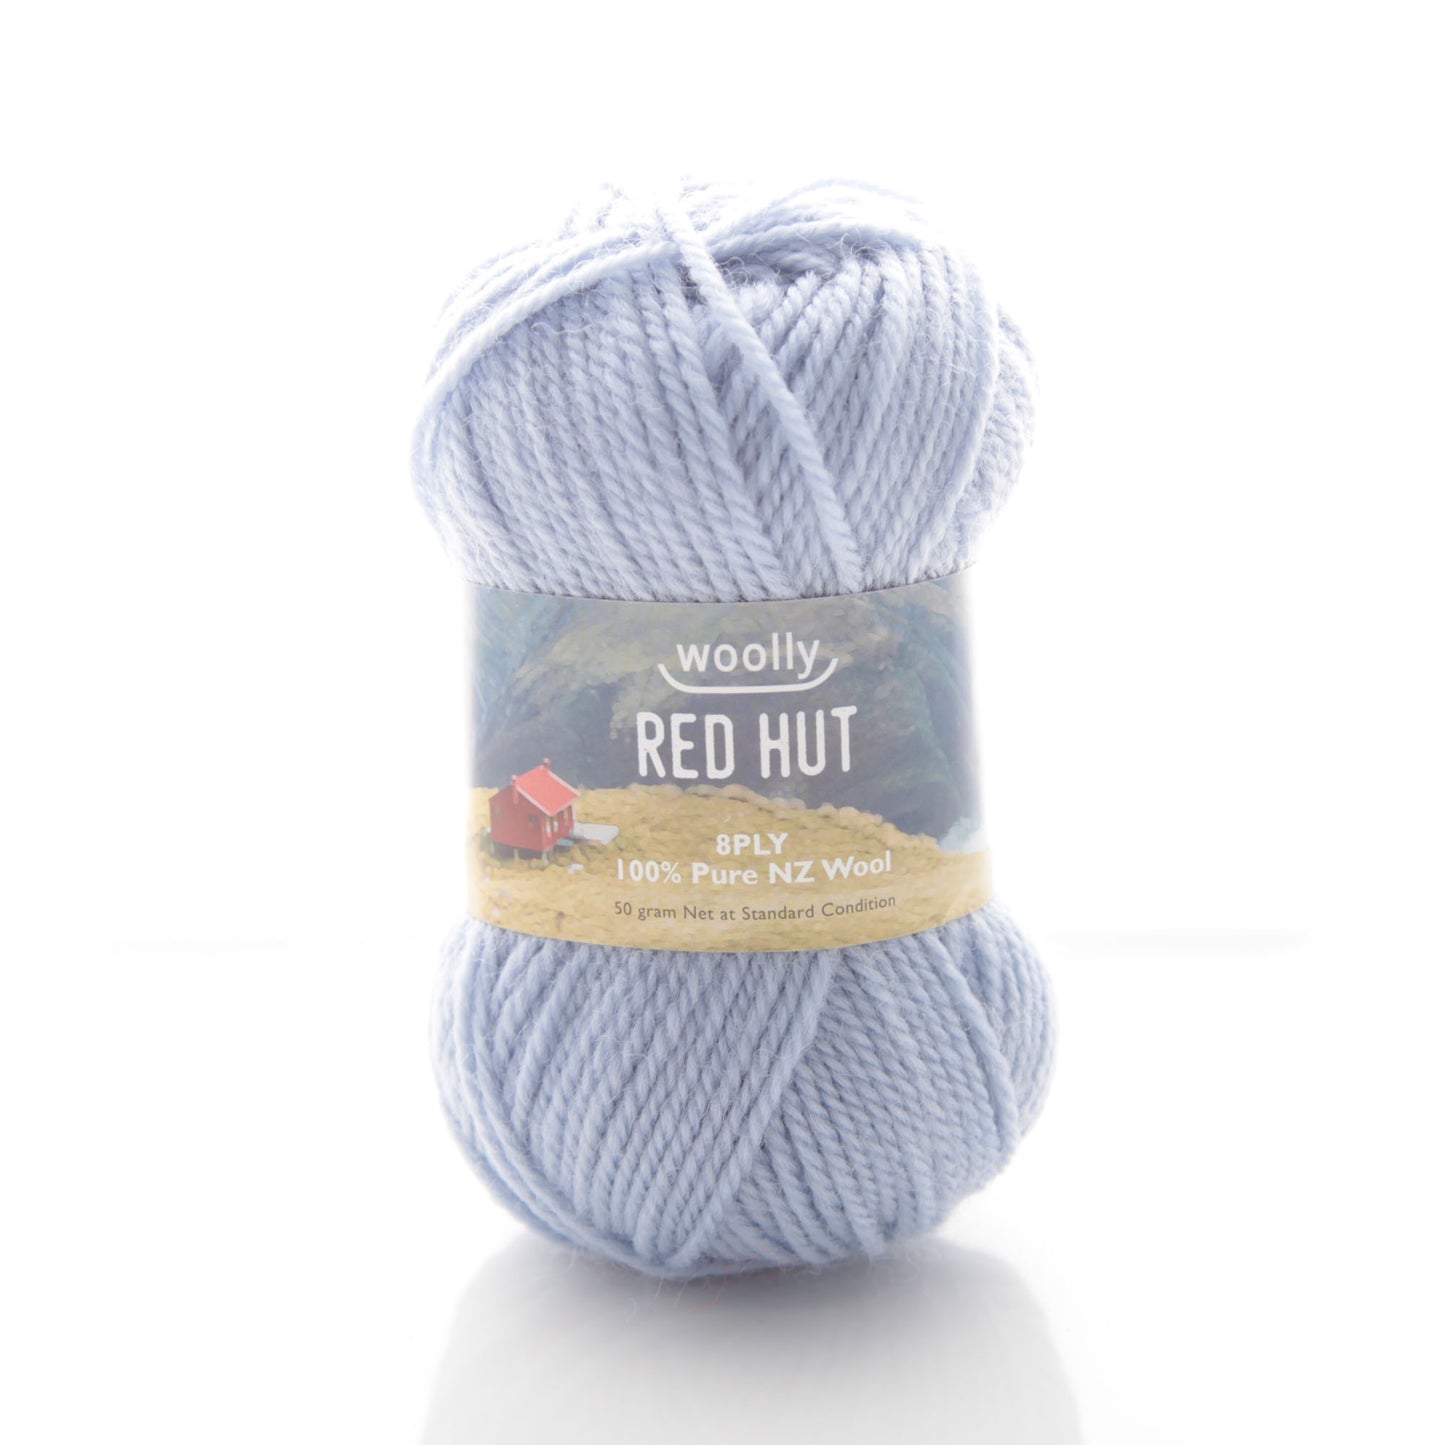 Red Hut 8 ply Wool